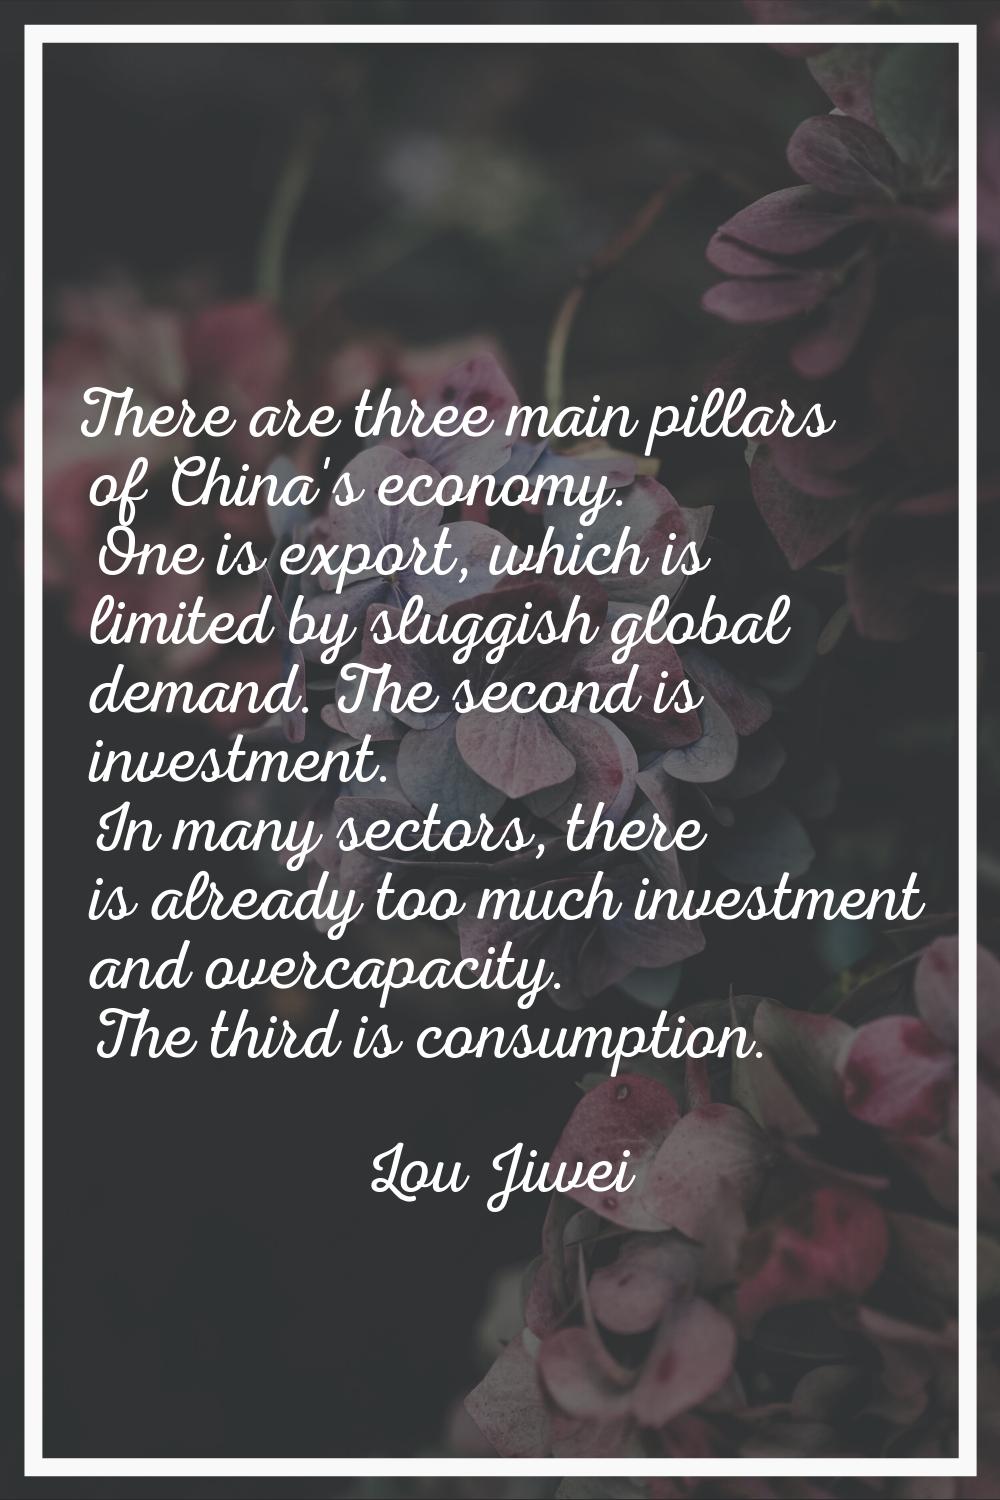 There are three main pillars of China's economy. One is export, which is limited by sluggish global